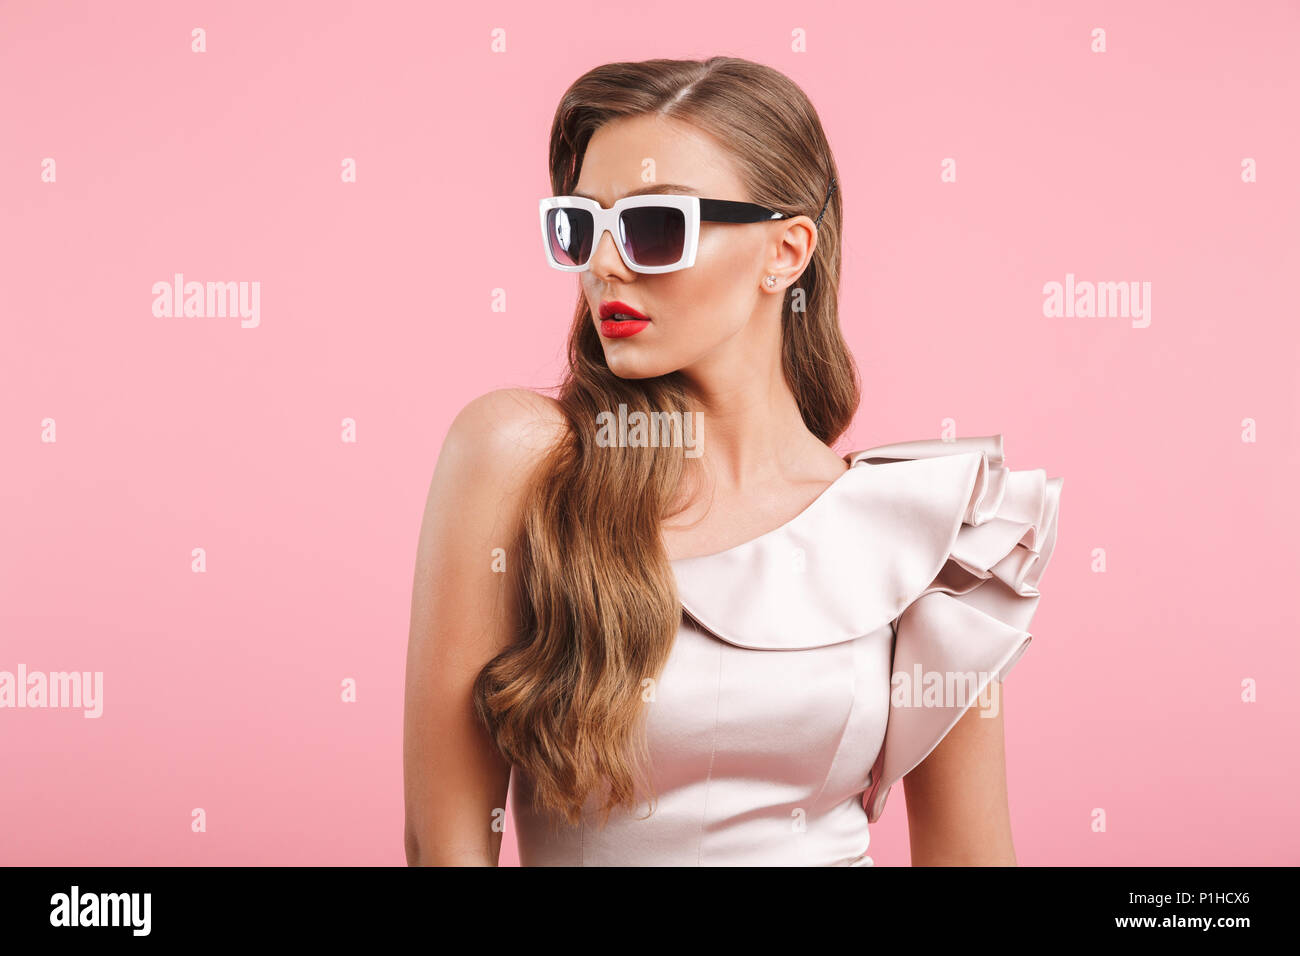 Portrait closeup of fashionable woman 20s in dress looking aside in stylish square sunglasses isolated over pink background Stock Photo